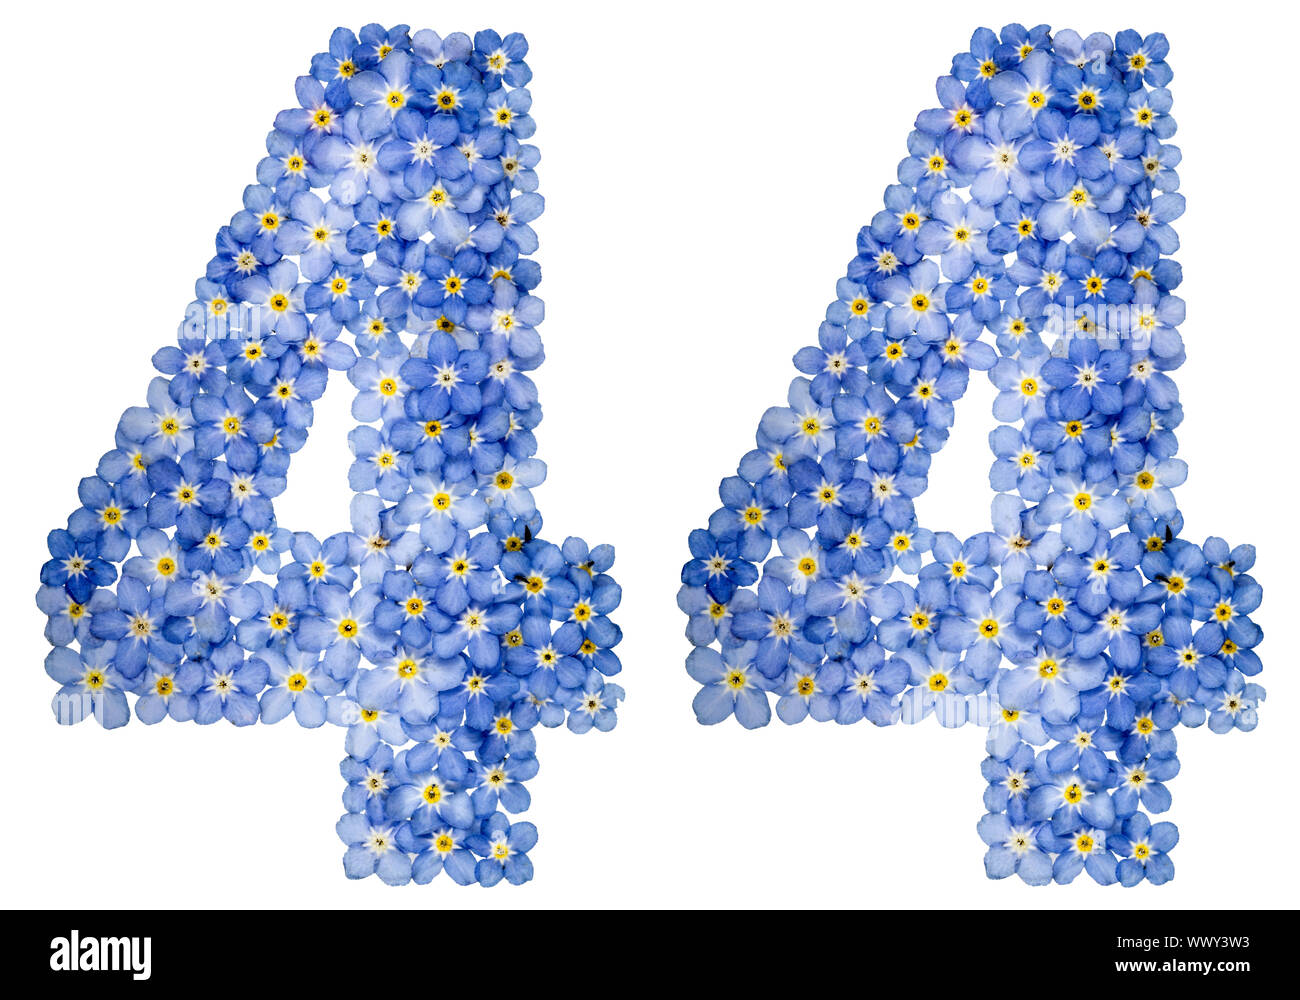 Arabic numeral 44, forty four, from blue forget-me-not flowers Stock Photo